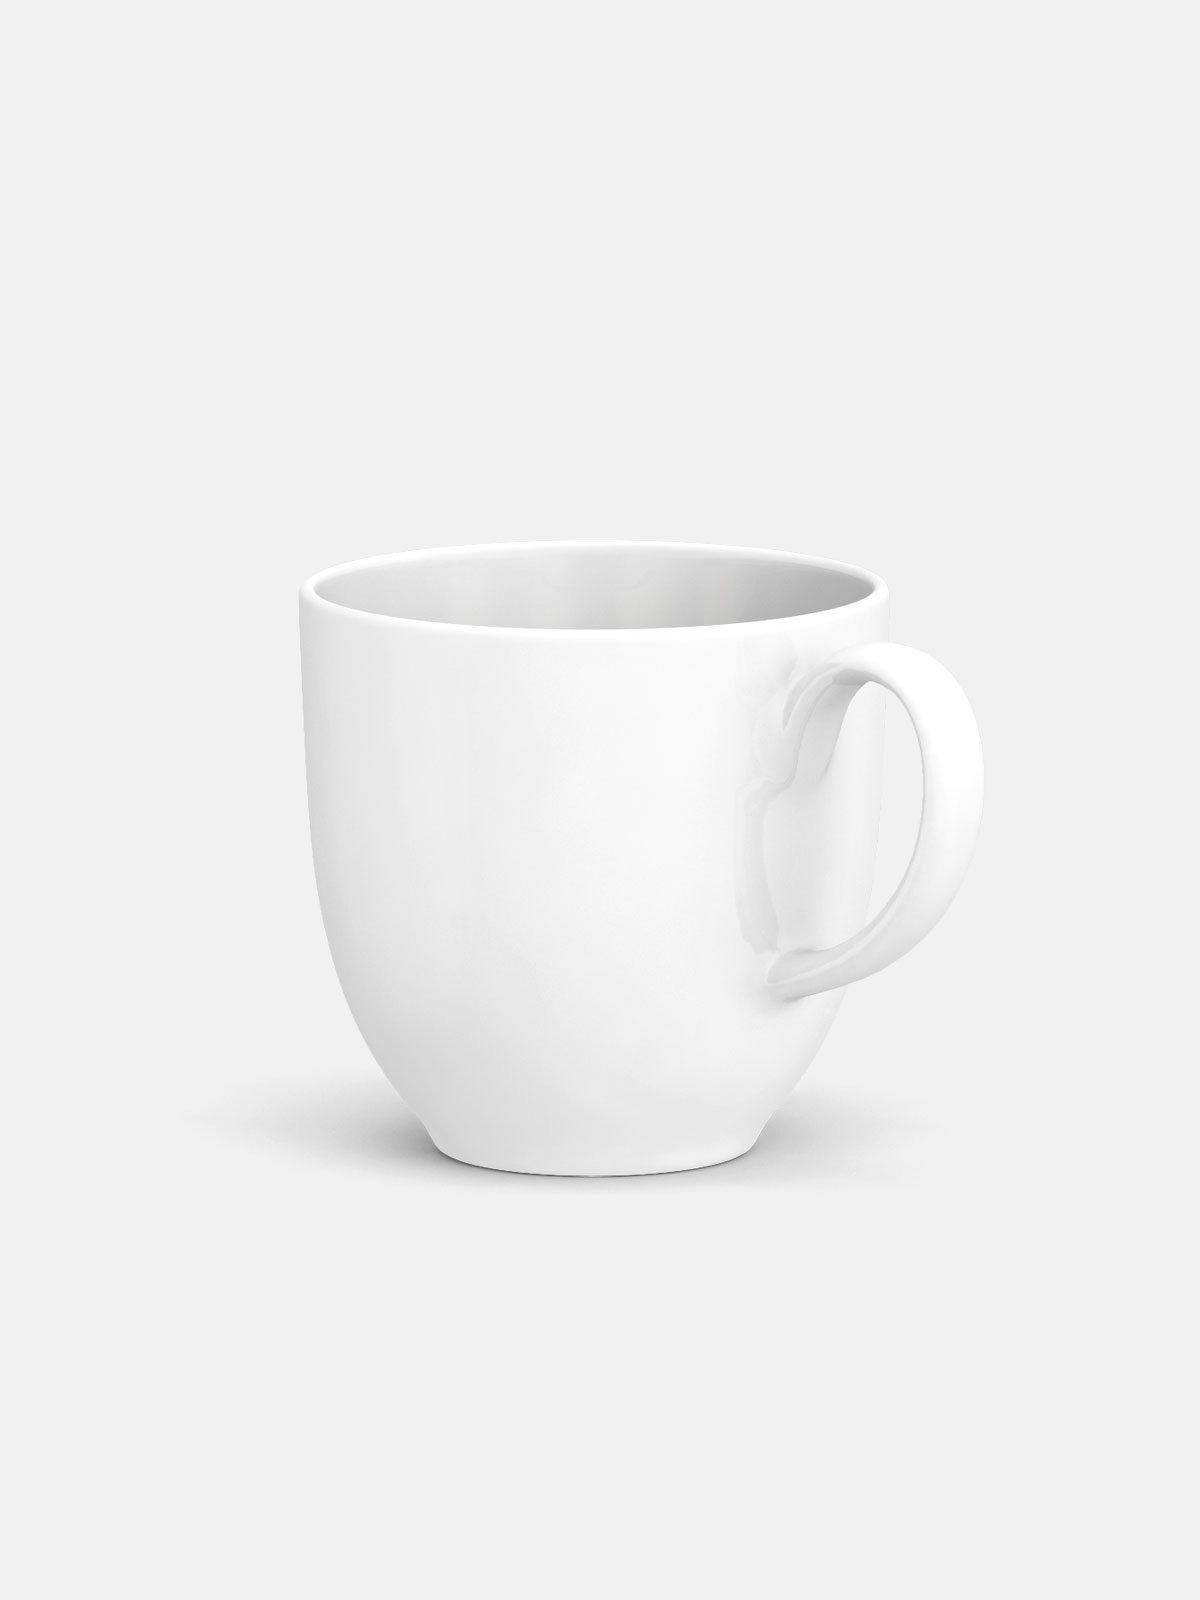 Small coffee cup